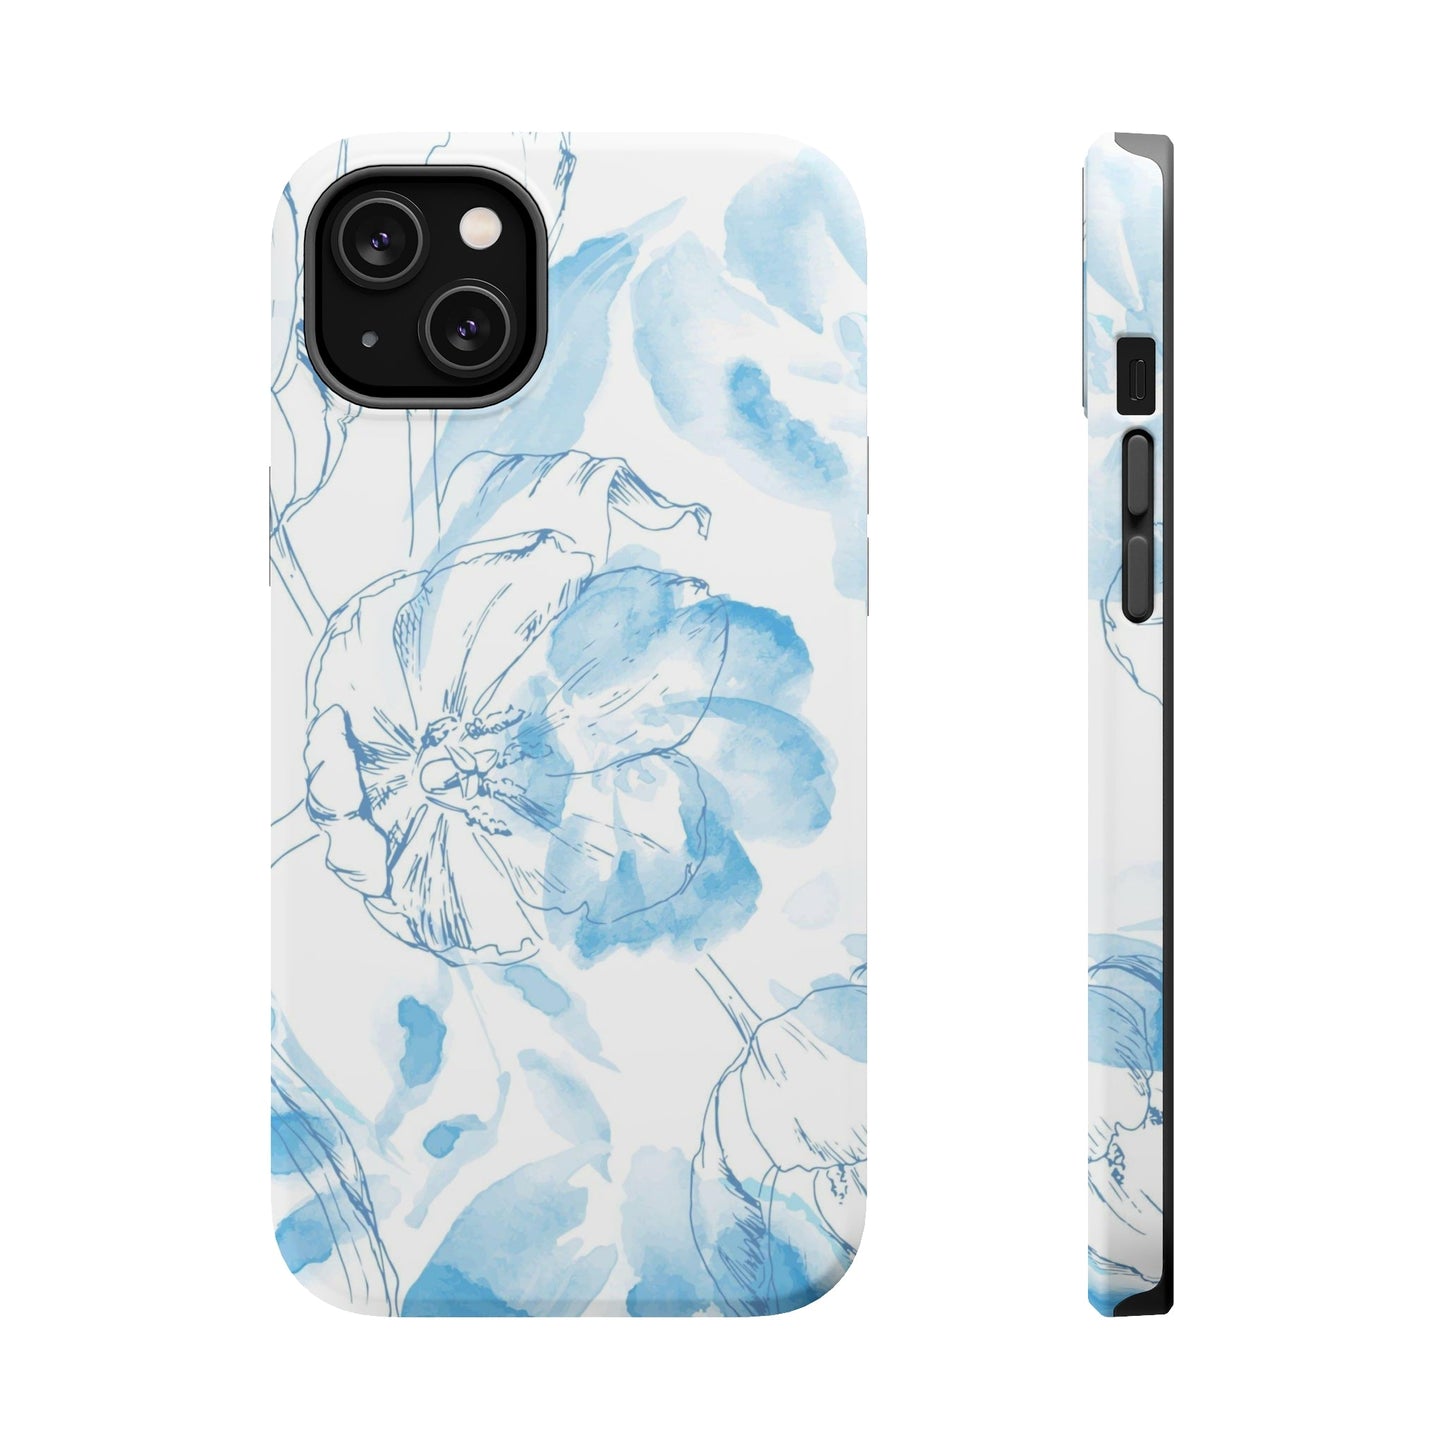 Blue Floral MagSafe iPhone Case - Cheerful Lane